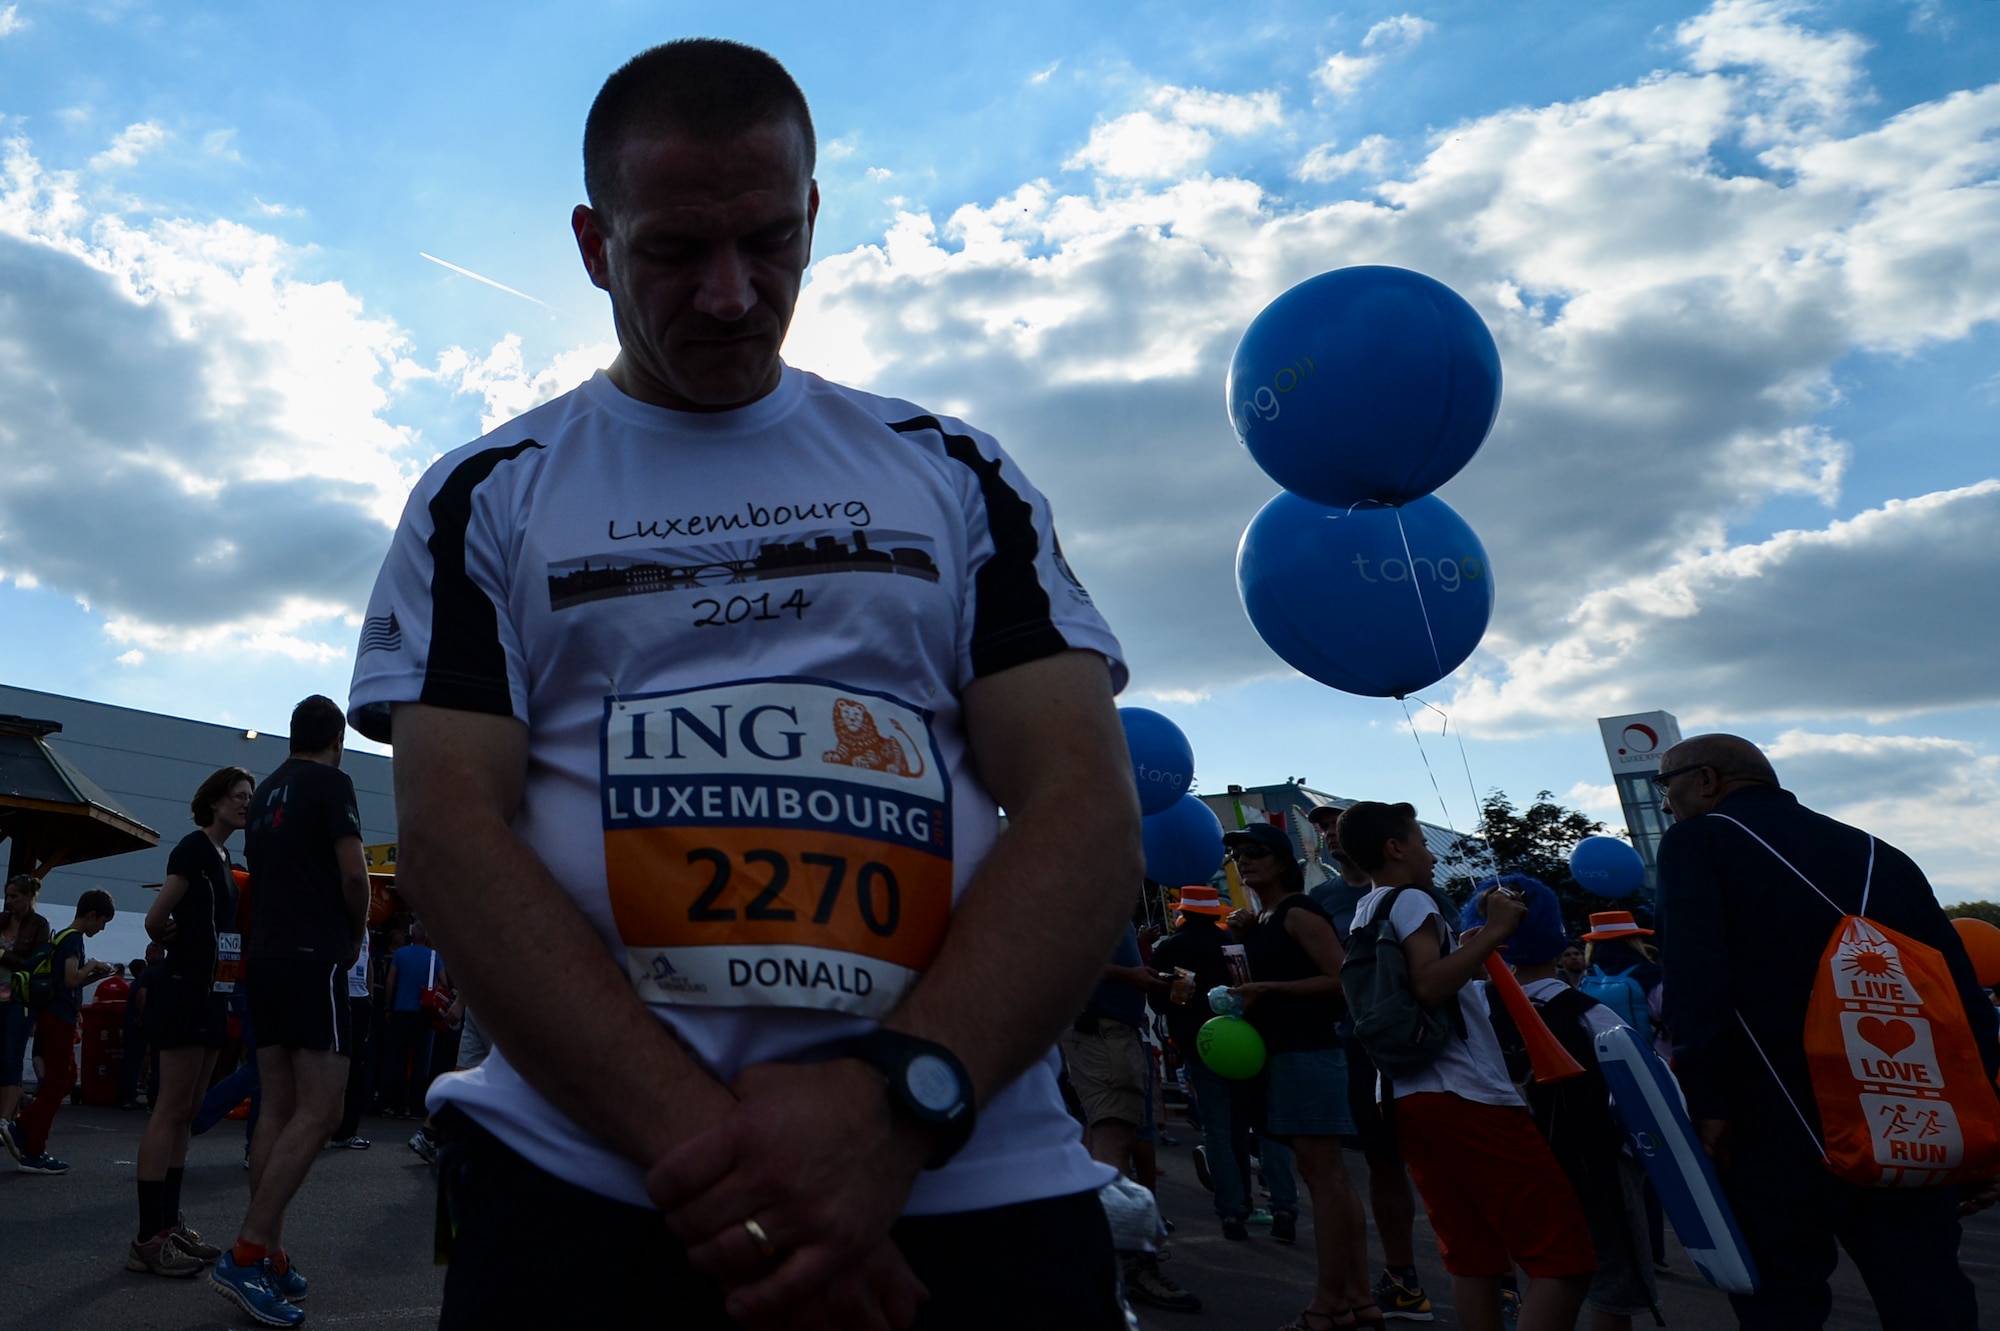 U.S. Air Force Master Sgt. Donald Stichter, 52nd Equipment Maintenance Squadron NCO in charge of munitions inspection, from Lakewood, Colo., prays right before running in the ING Luxembourg Night Marathon May 31, 2014, in Luxembourg. Comprehensive Airman Fitness is a holistic approach to develop over-arching Airman fitness and resilience. Its four pillars include physical, mental, spiritual and social aspects. (U.S. Air Force photo by Senior Airman Rusty Frank/Released)